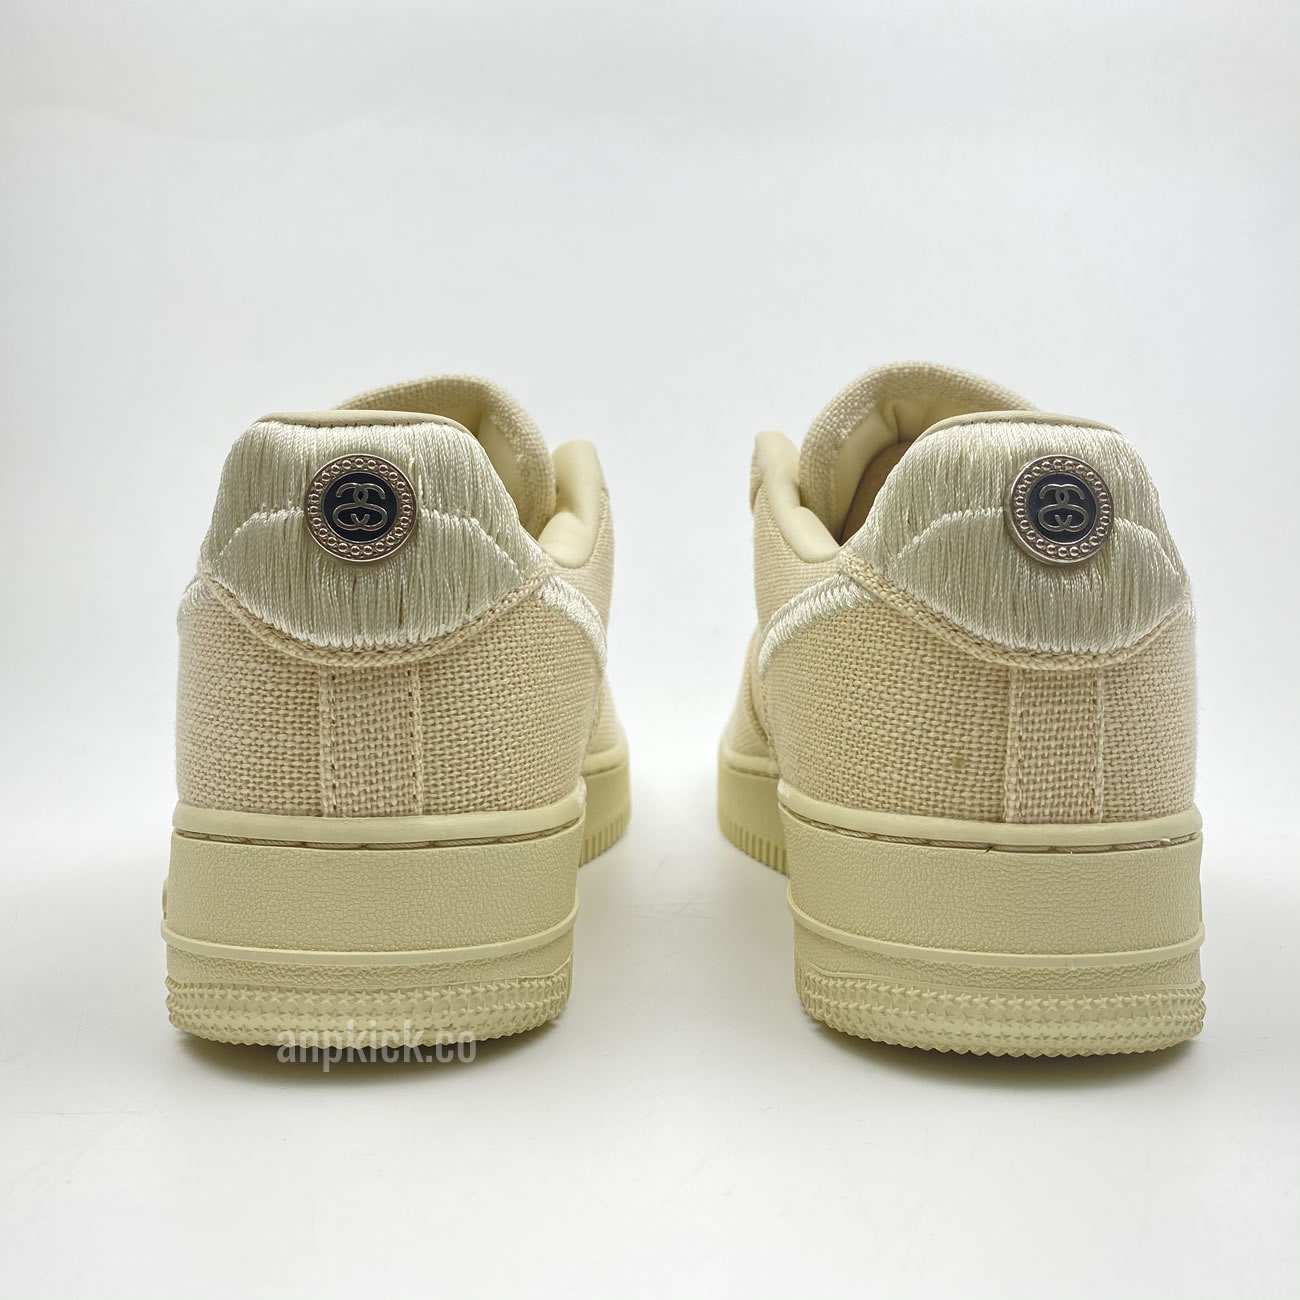 Stussy Nike Air Force 1 Low Fossil Stone Cz9084 200 Release Date (3) - newkick.org